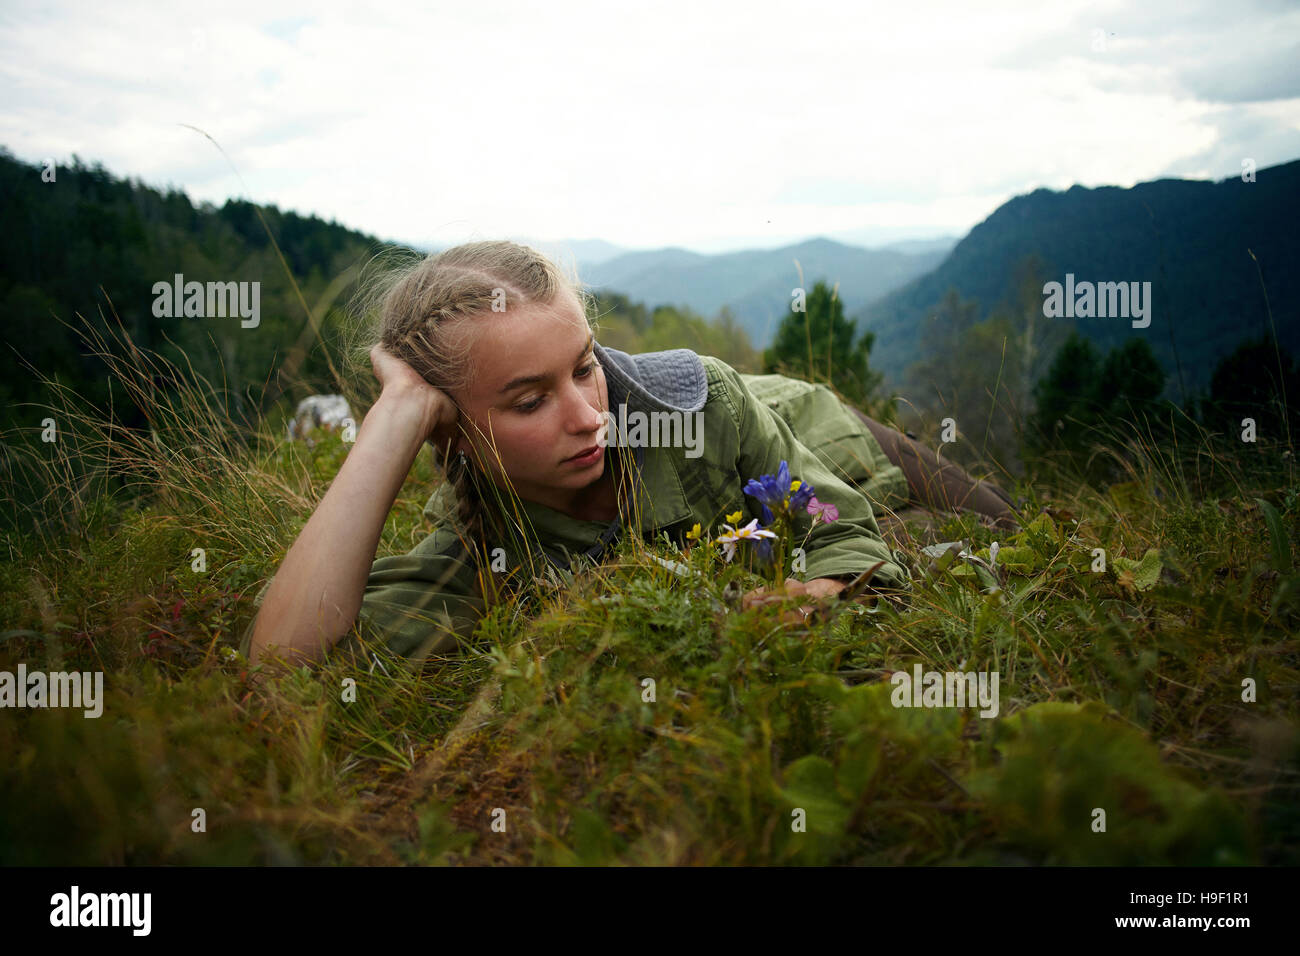 Caucasian girl holding wildflowers laying in grass sur hill Banque D'Images